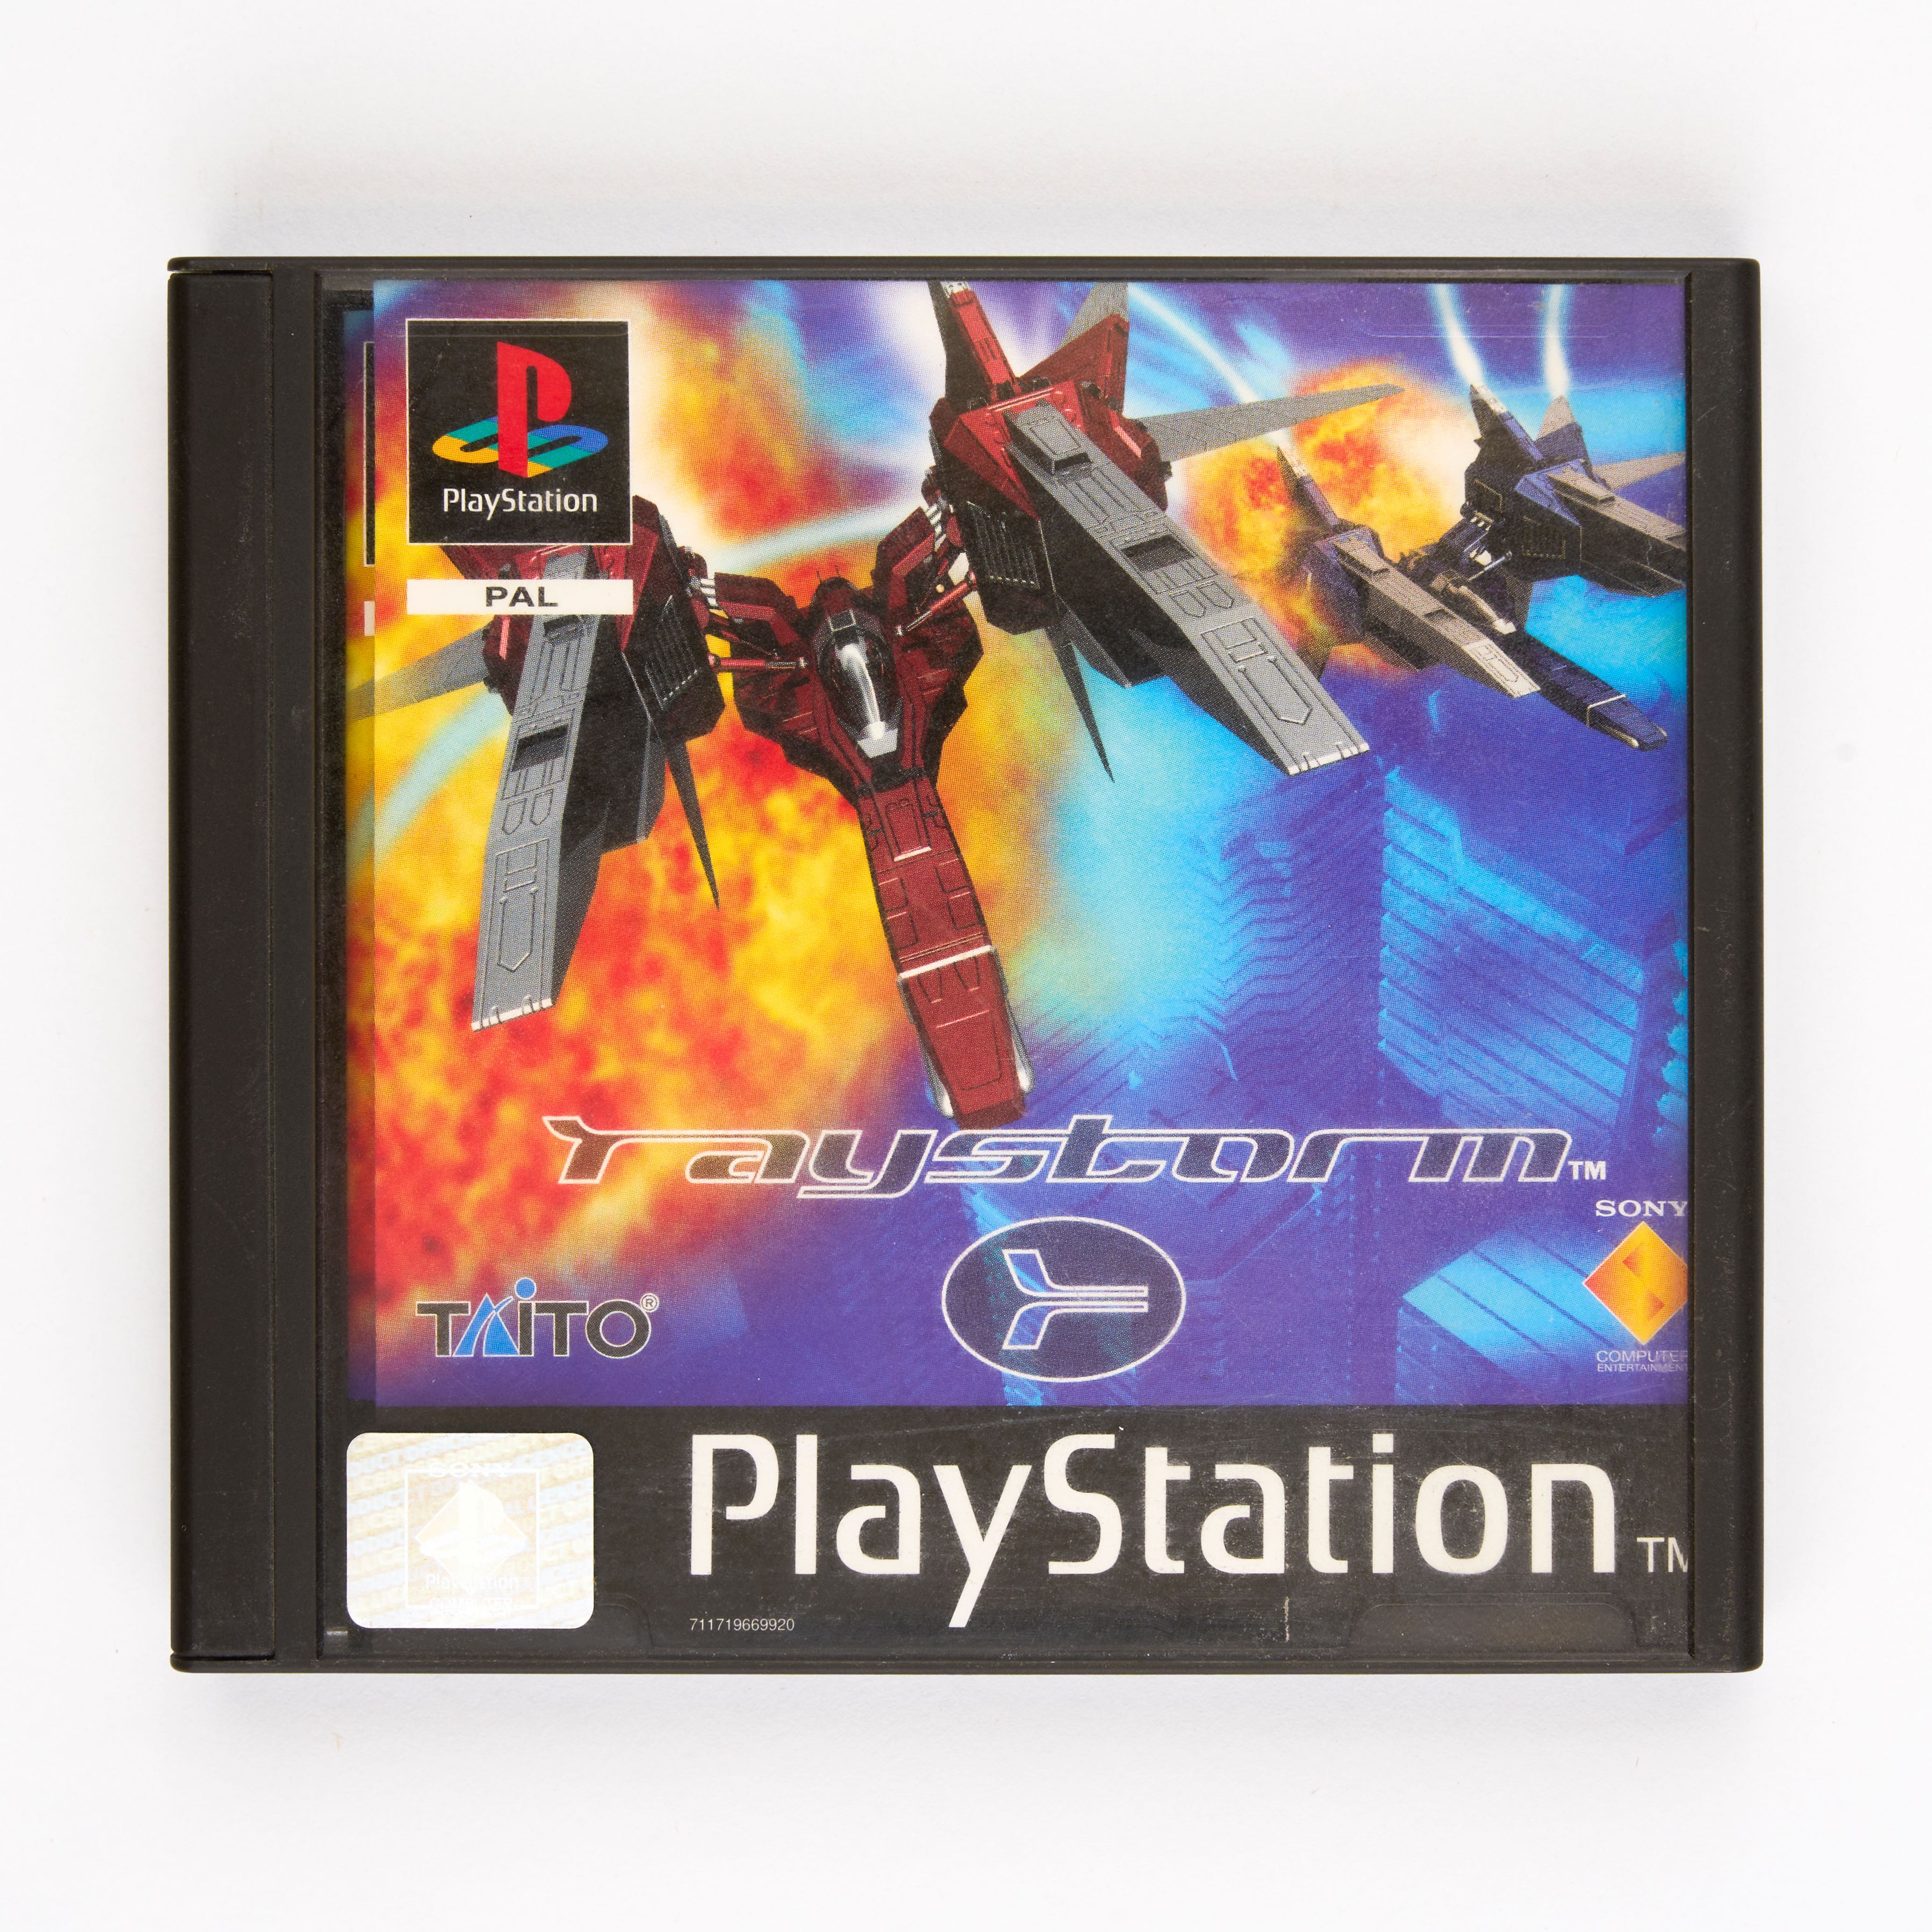 Sony - Raystorm PAL - Playstation - Complete In Box